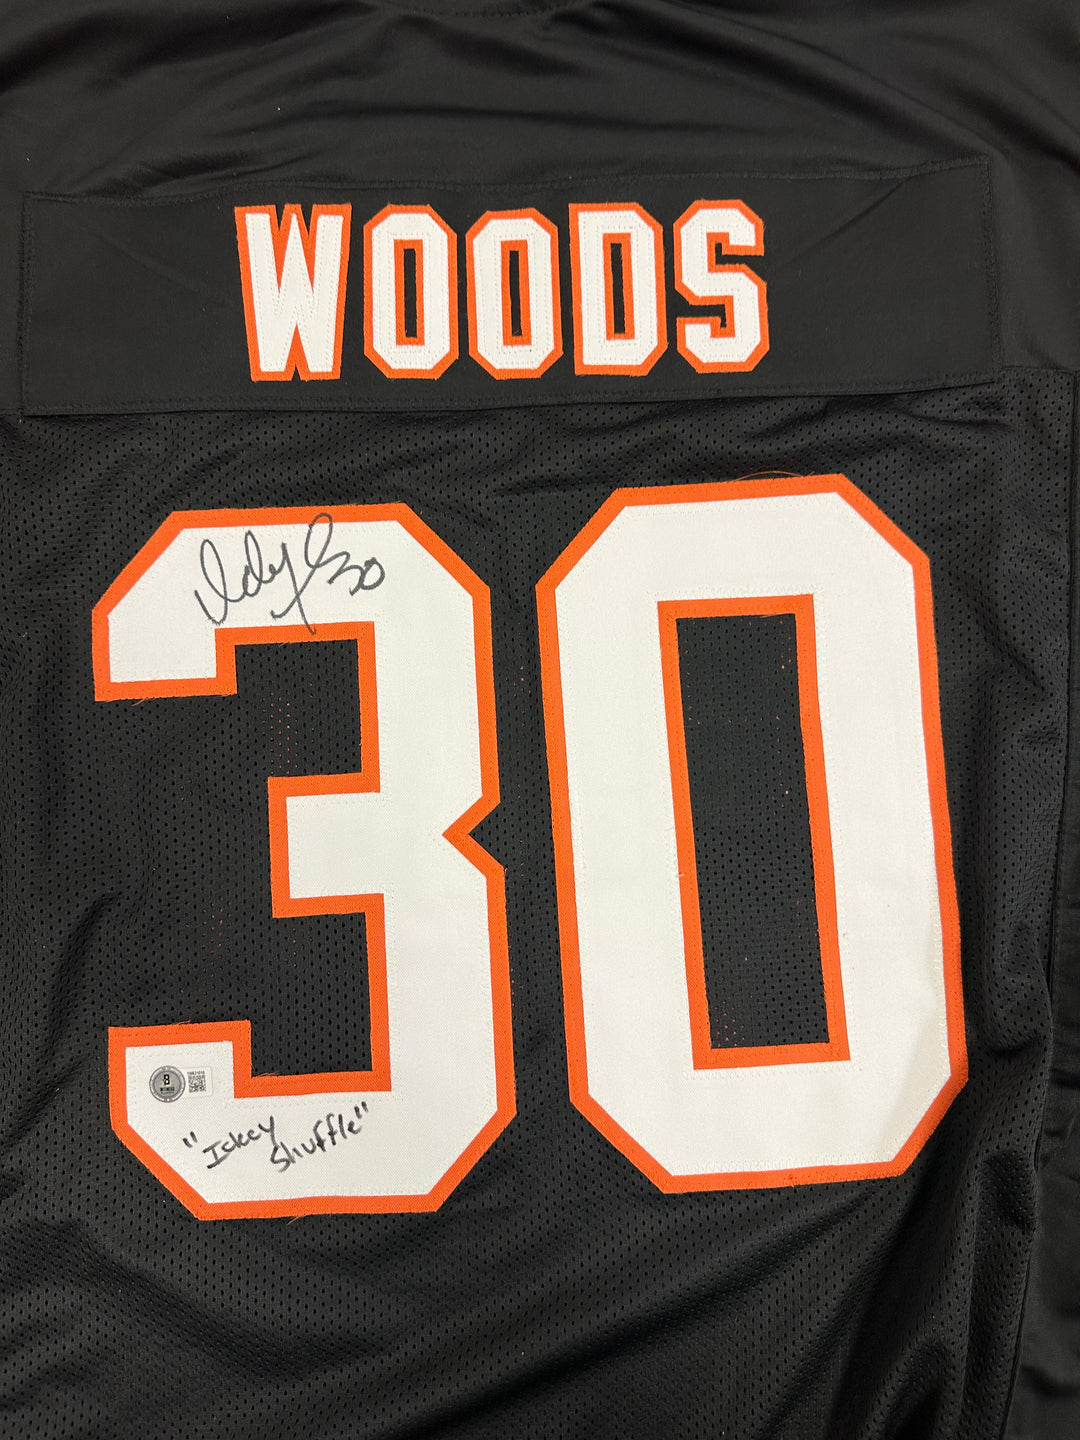 Icky Woods signed custom Bengals jersey,with "Icky shuffle" ins